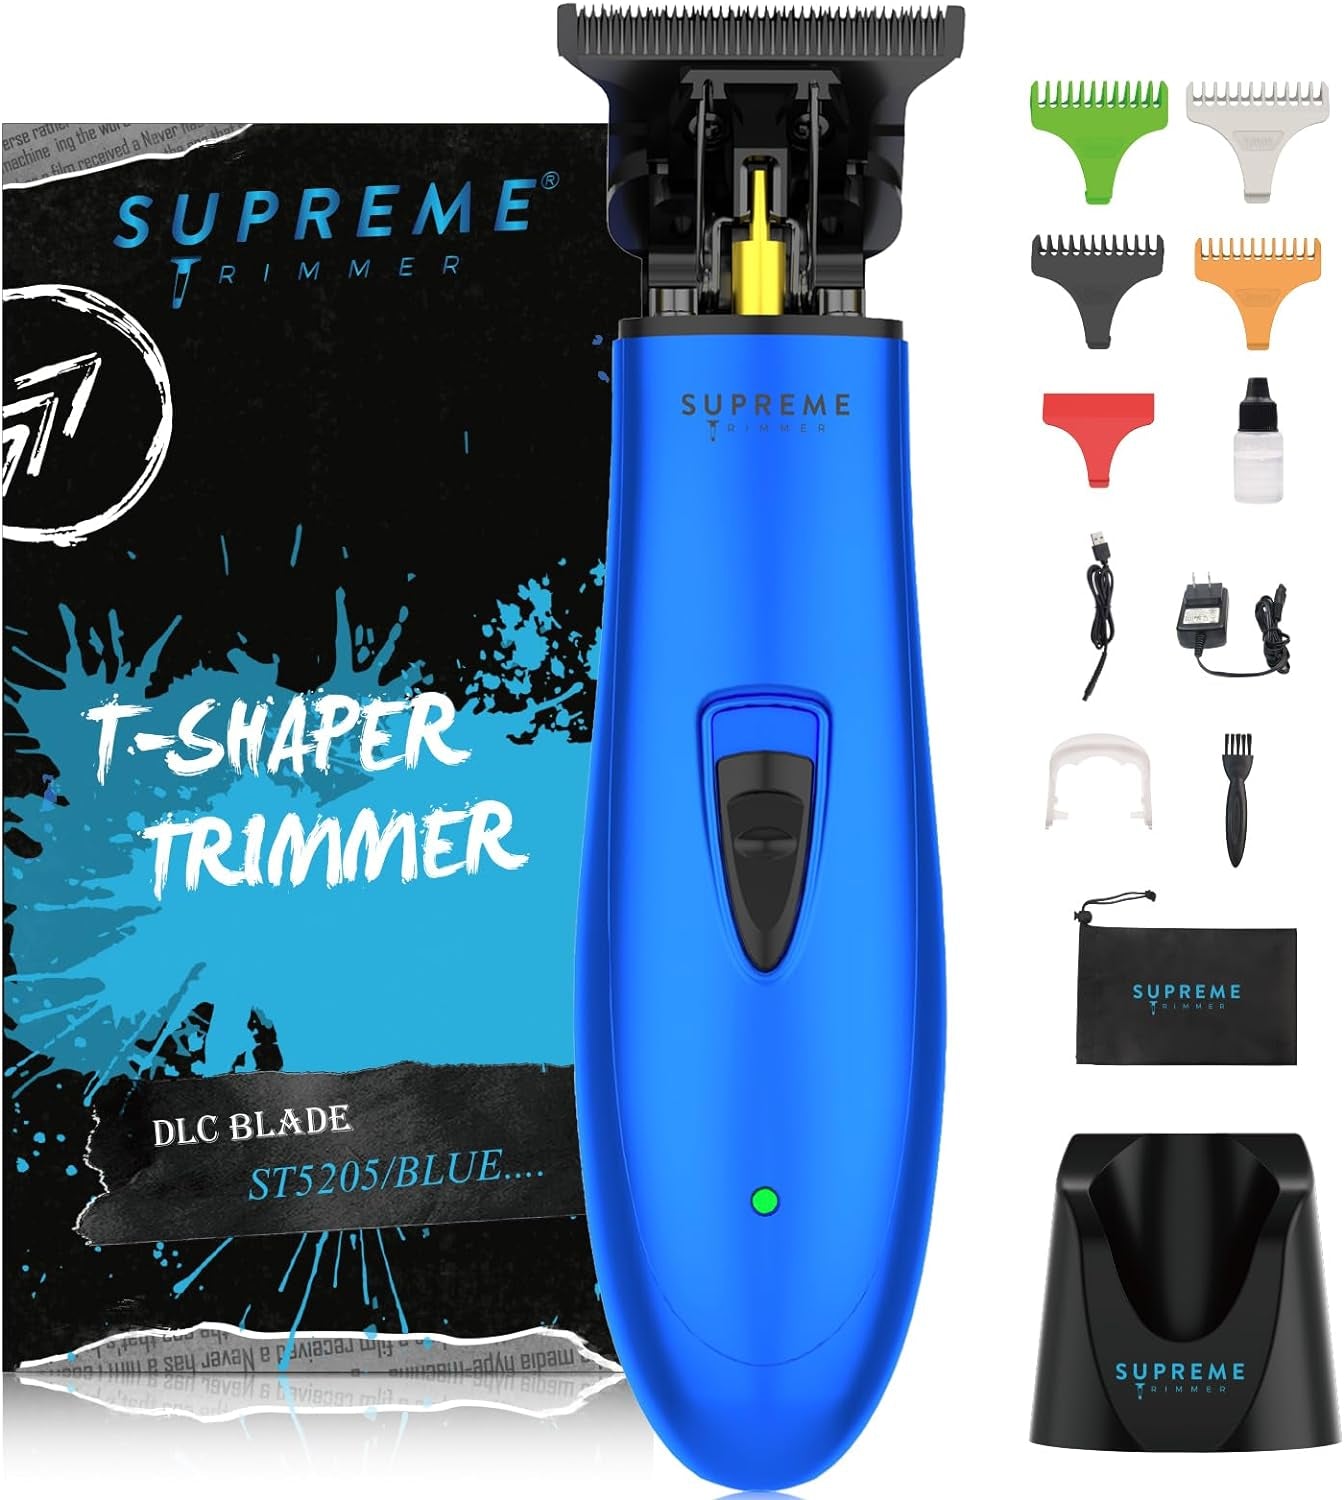 Professional Barber Hair Trimmer - Everyday-Sales.com